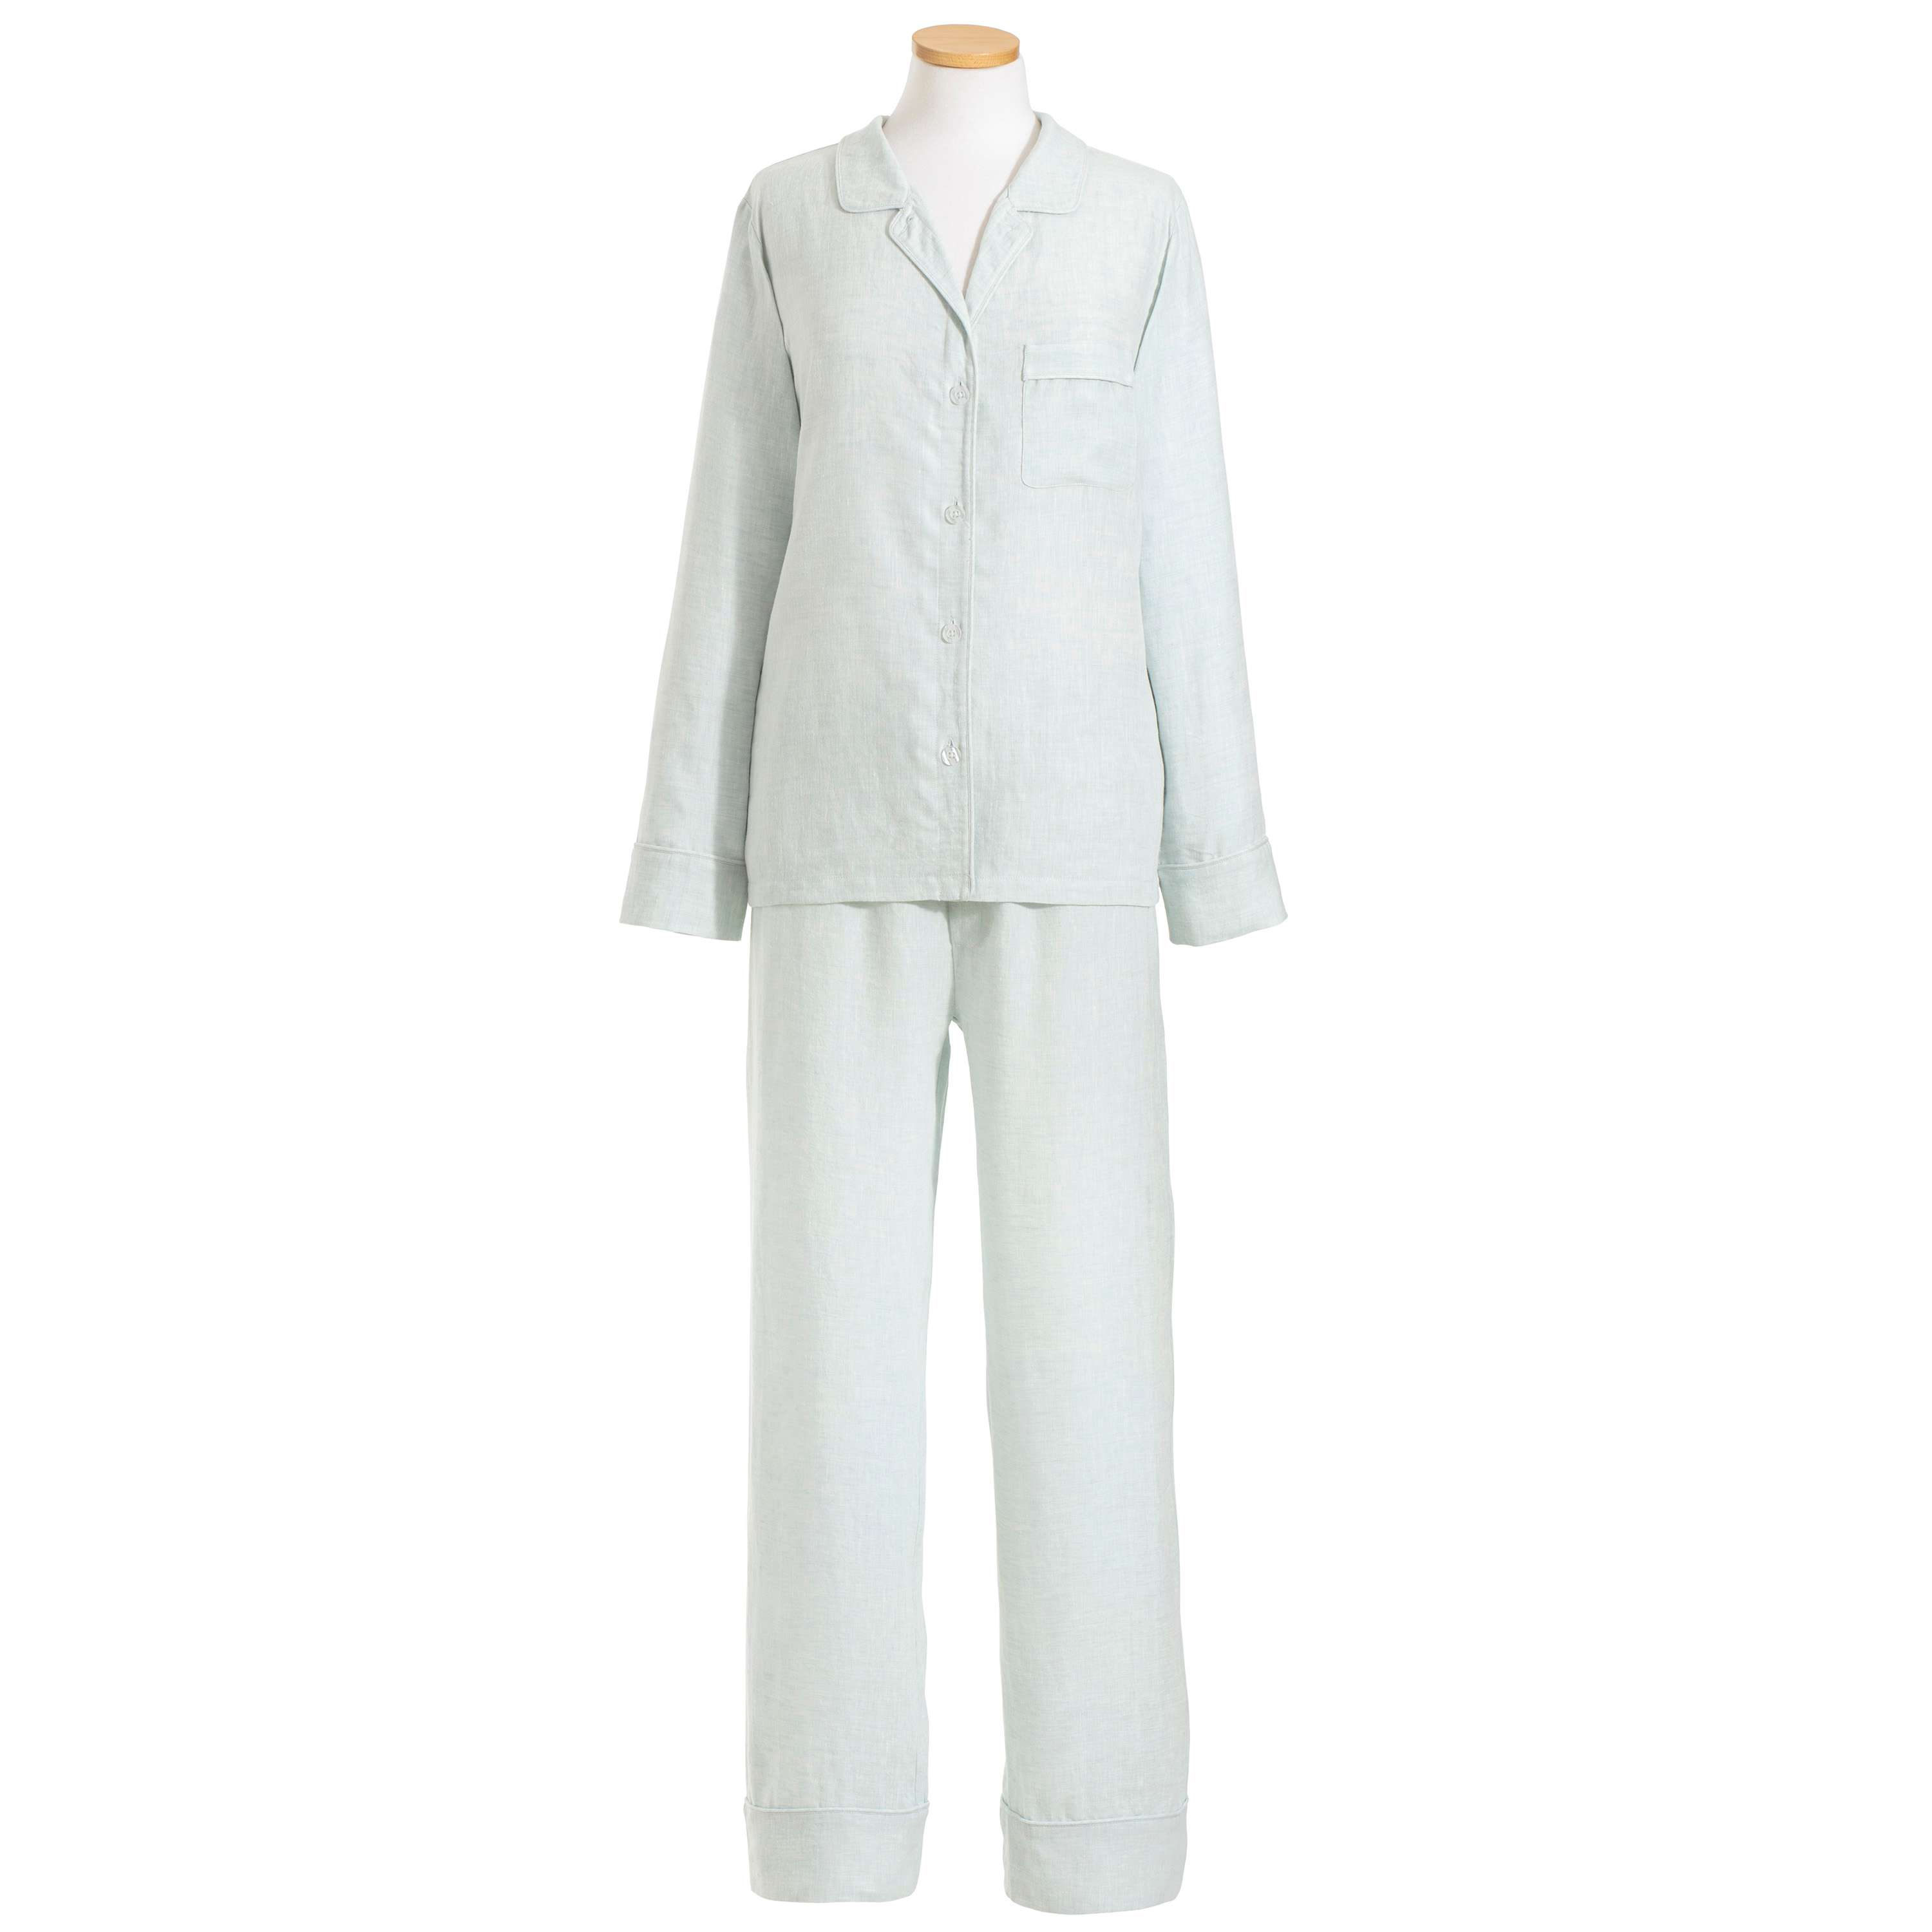 Lush Linen Pajama by Pine Cone Hill